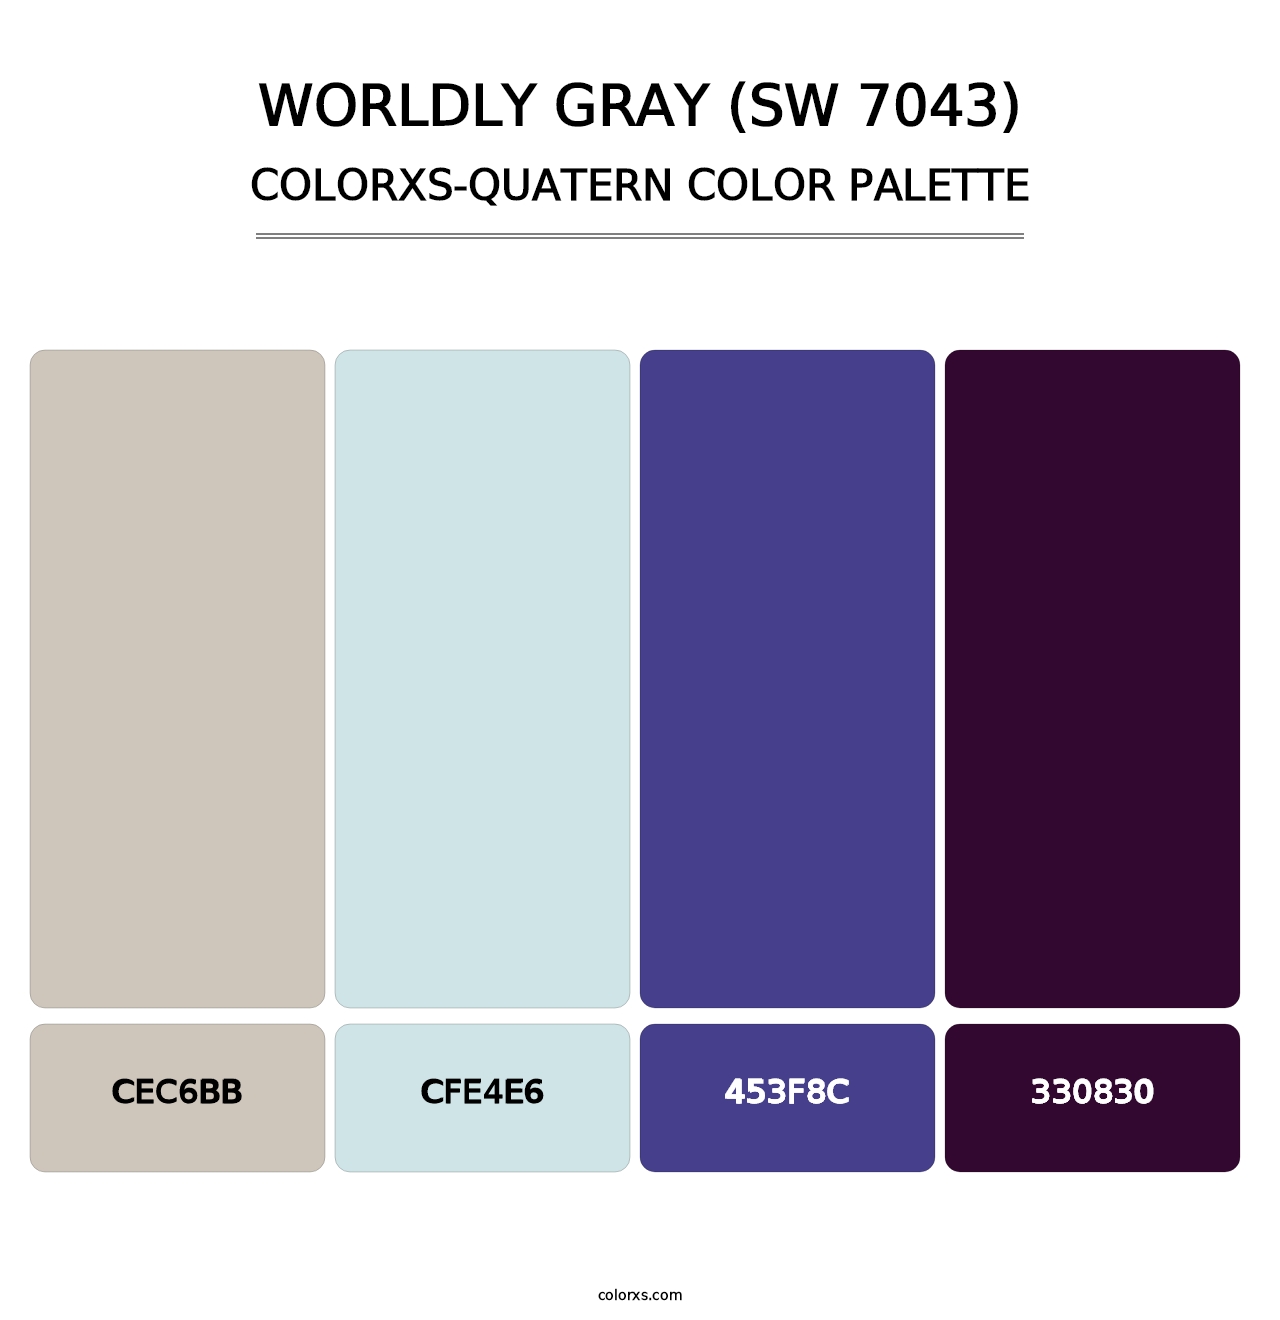 Worldly Gray (SW 7043) - Colorxs Quatern Palette